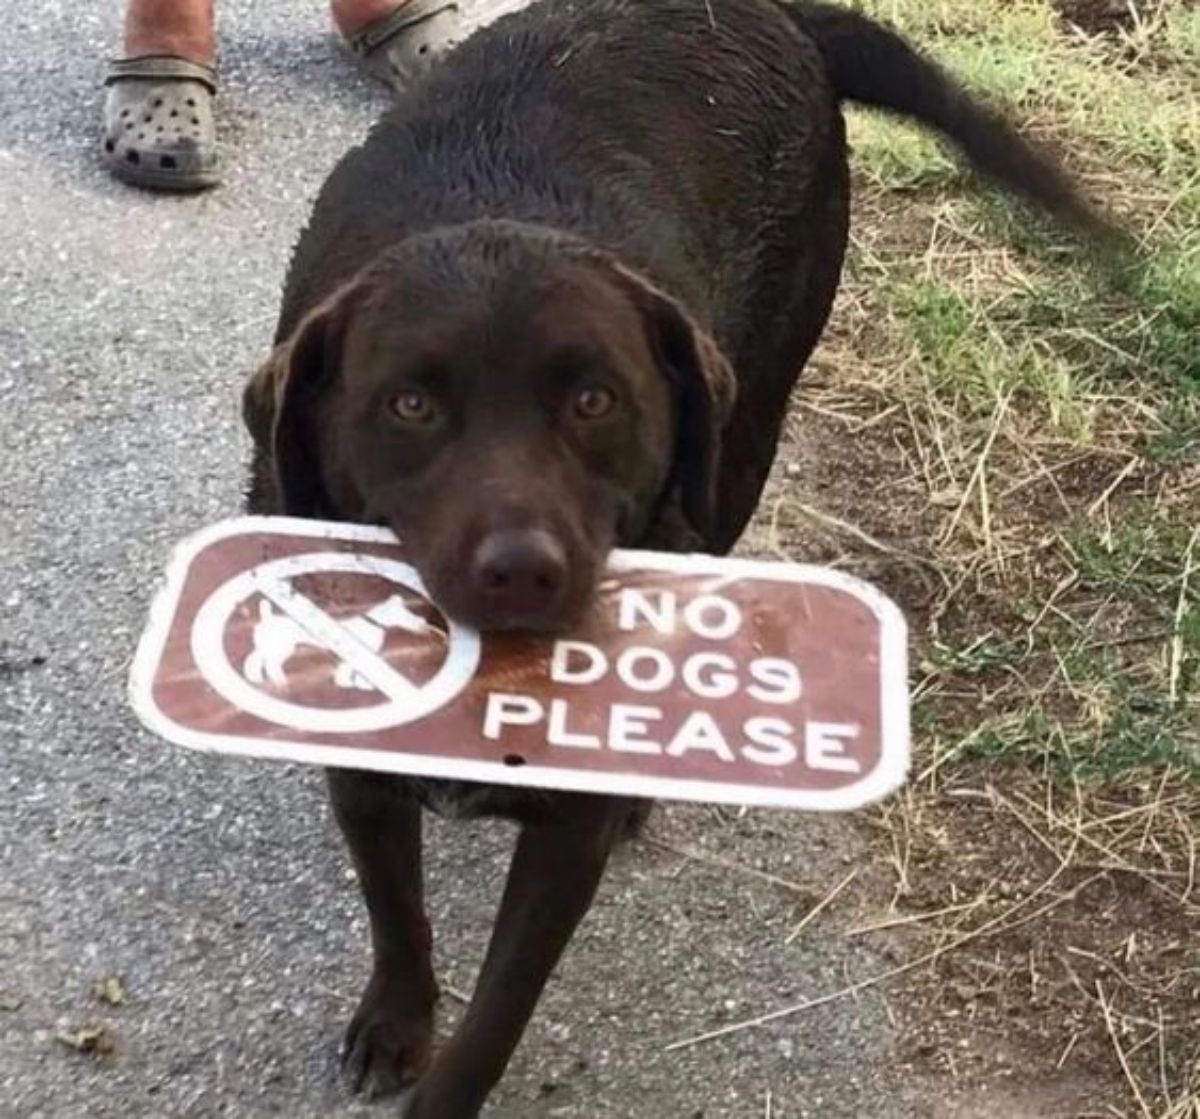 brown dog holding a red and white metal NO DOGS PLEASE sign in its mouth